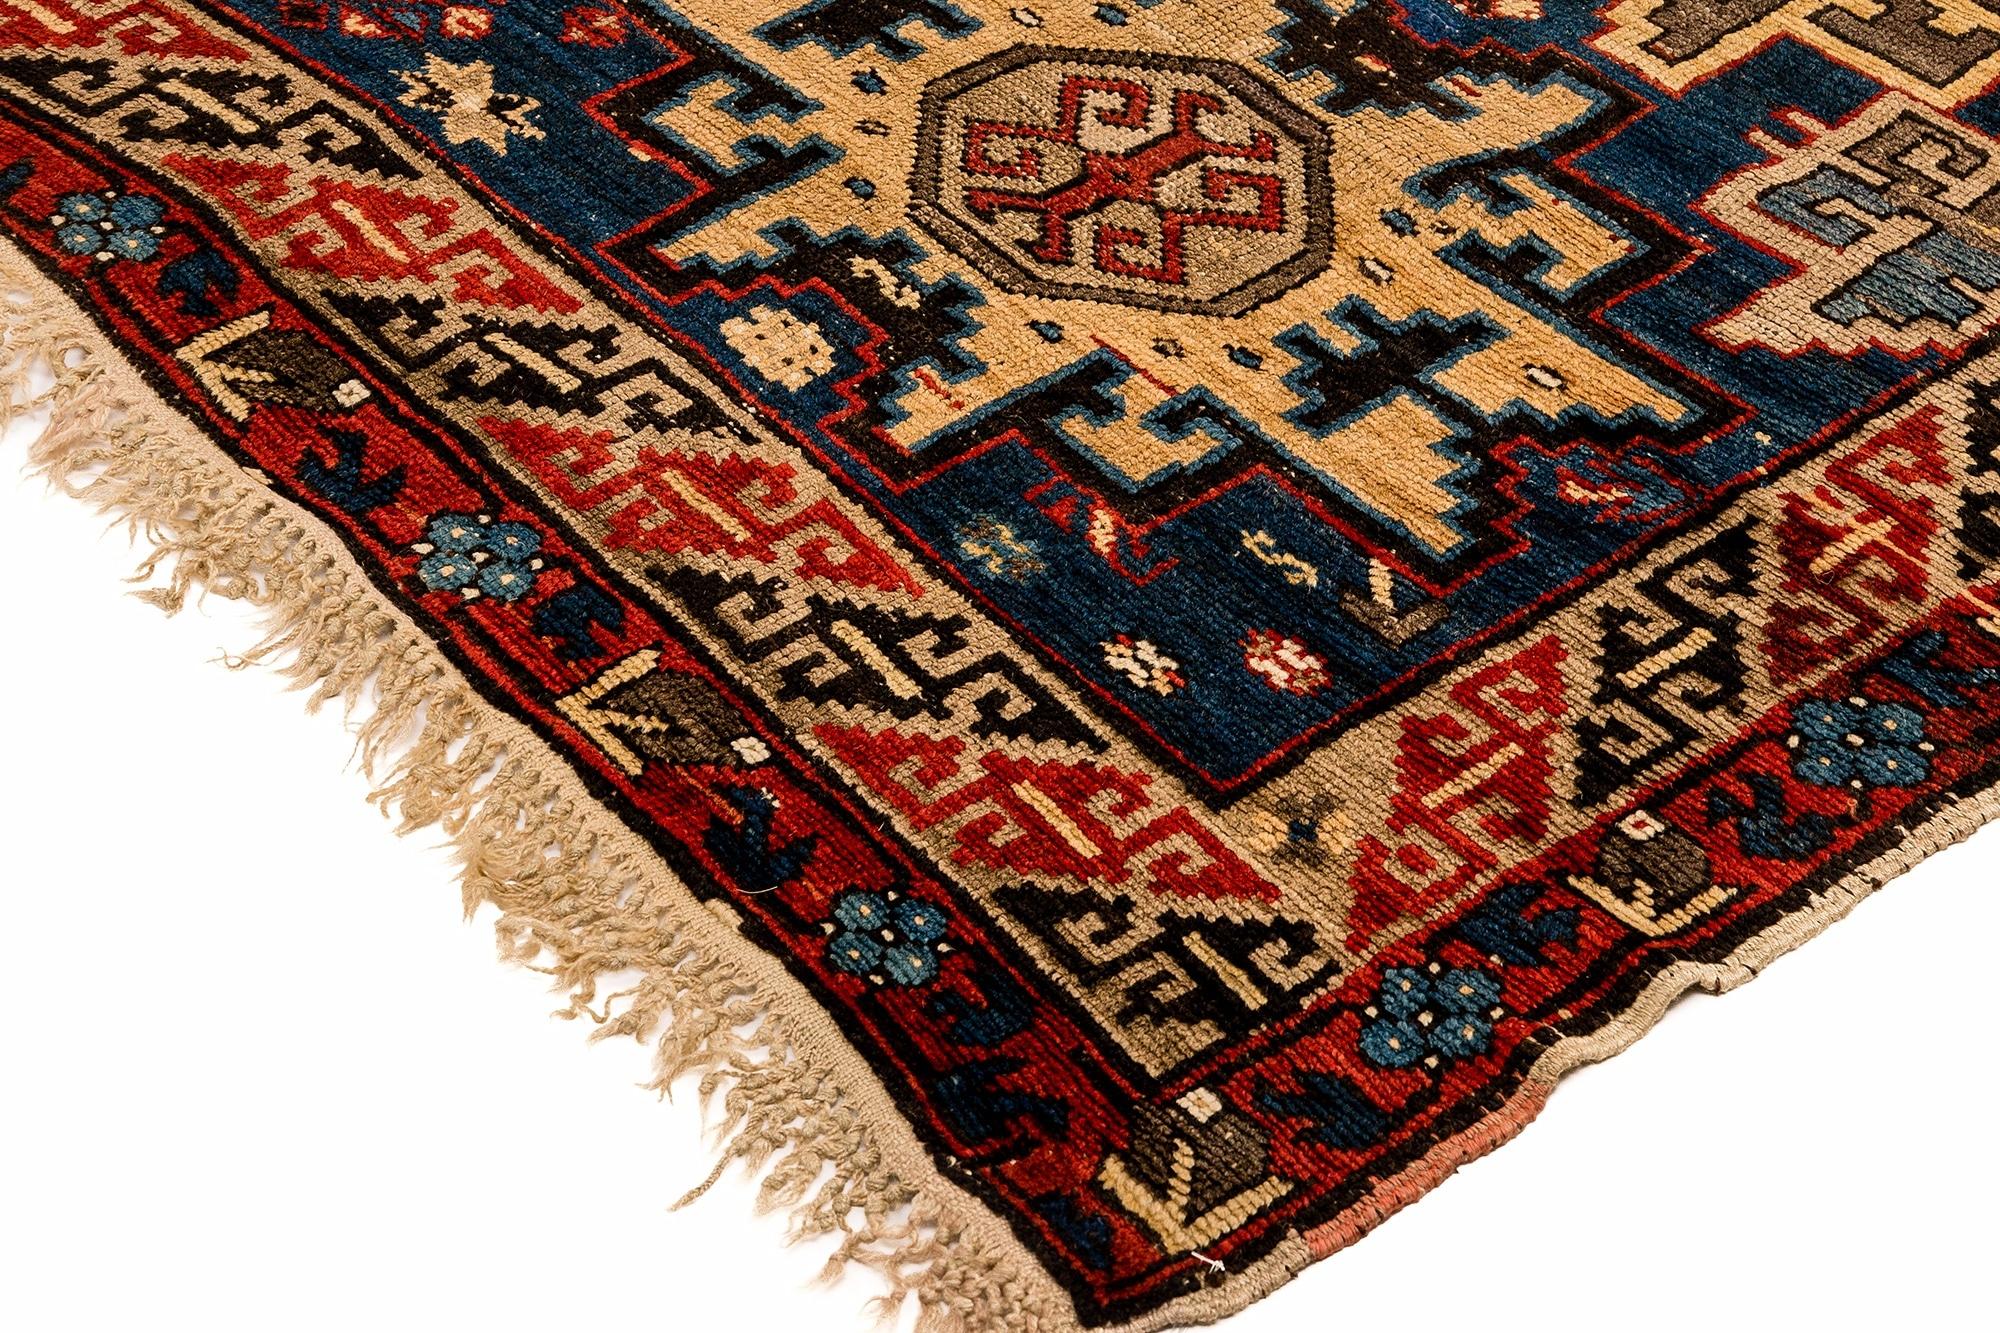 The iconic “Lesghi Star” motif is stunning on this antique handwoven Caucasus rug, woven in the Southern Kuba region of Azerbaijan. The vivid complimentary colors and design created by the weaver makes for a very well thought out artistic